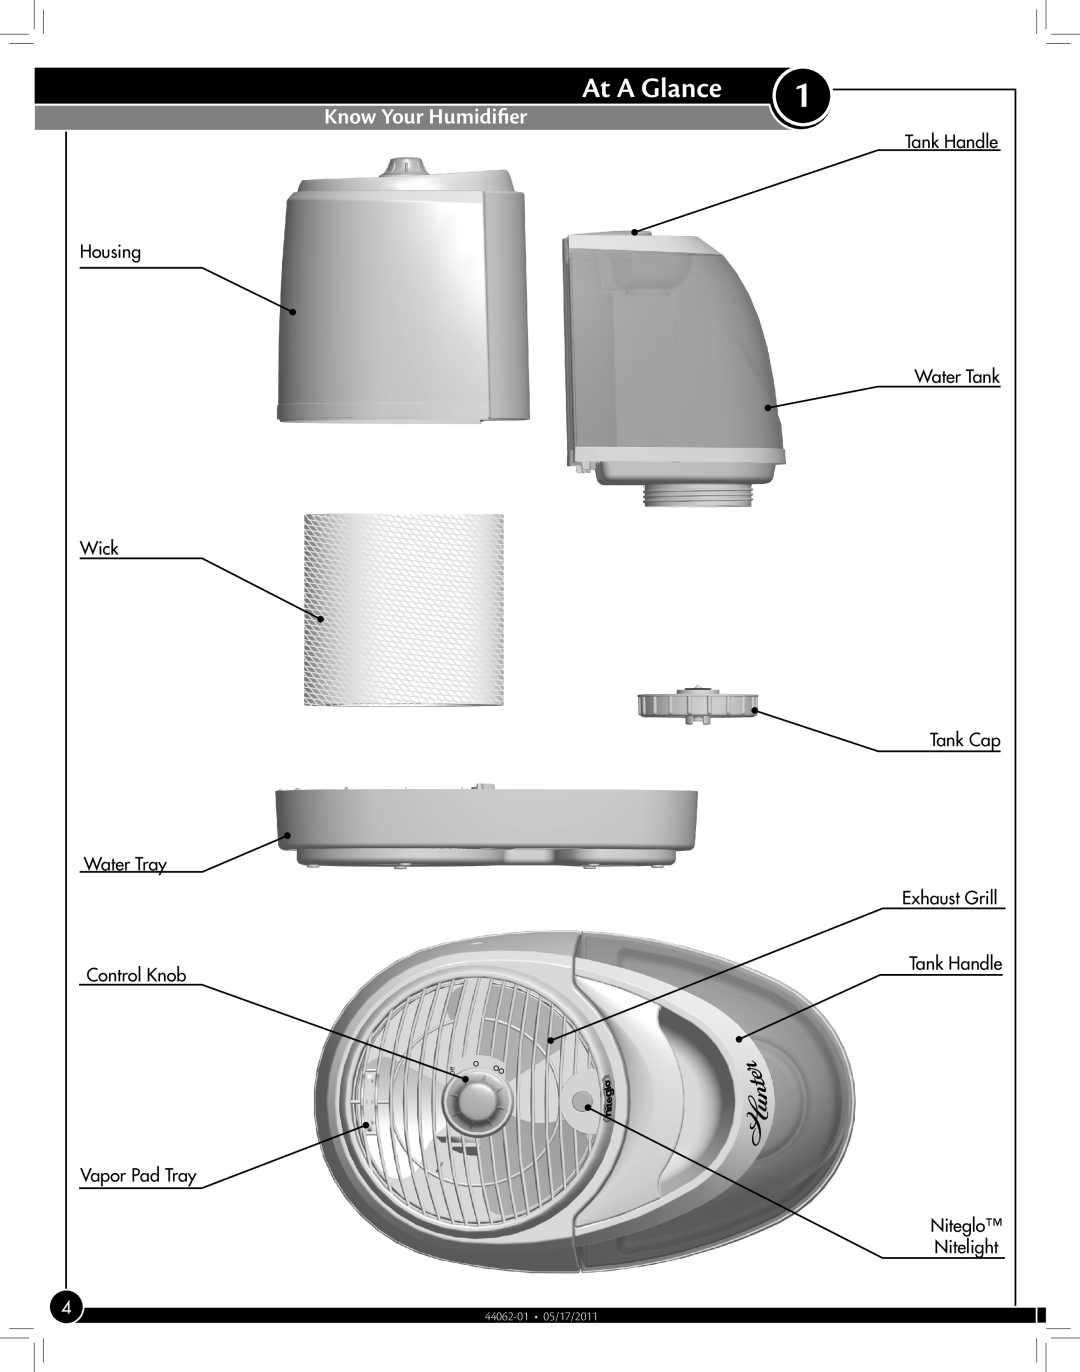 Hunter Fan 33119 manual Know Your Humidifier, At A Glance 